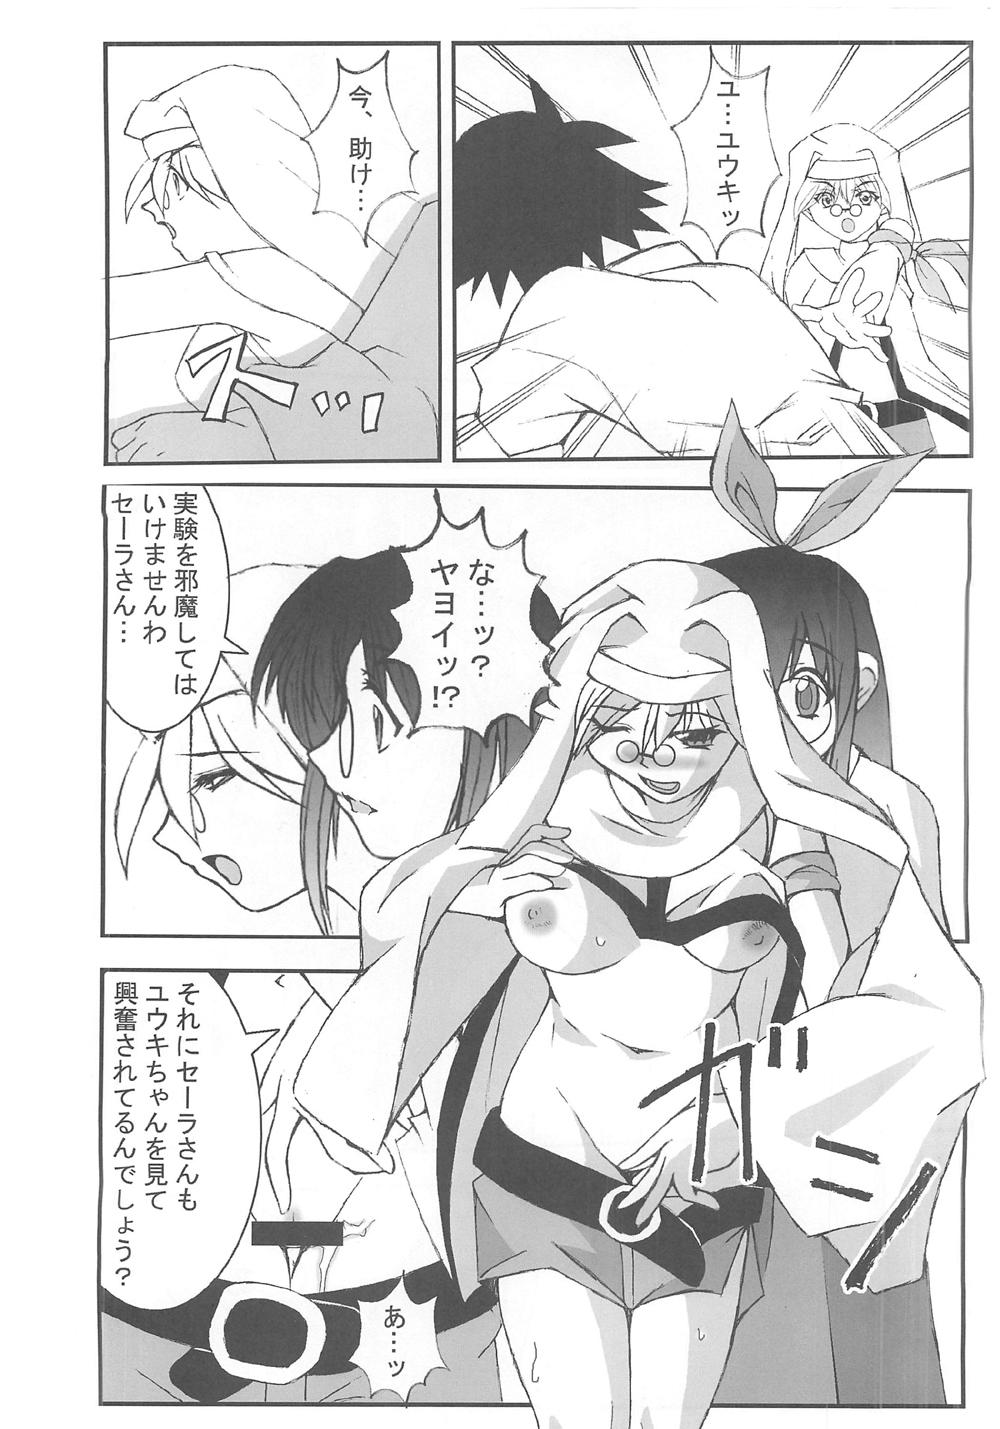 Long 供養⑤ - G on riders Mouth - Page 5